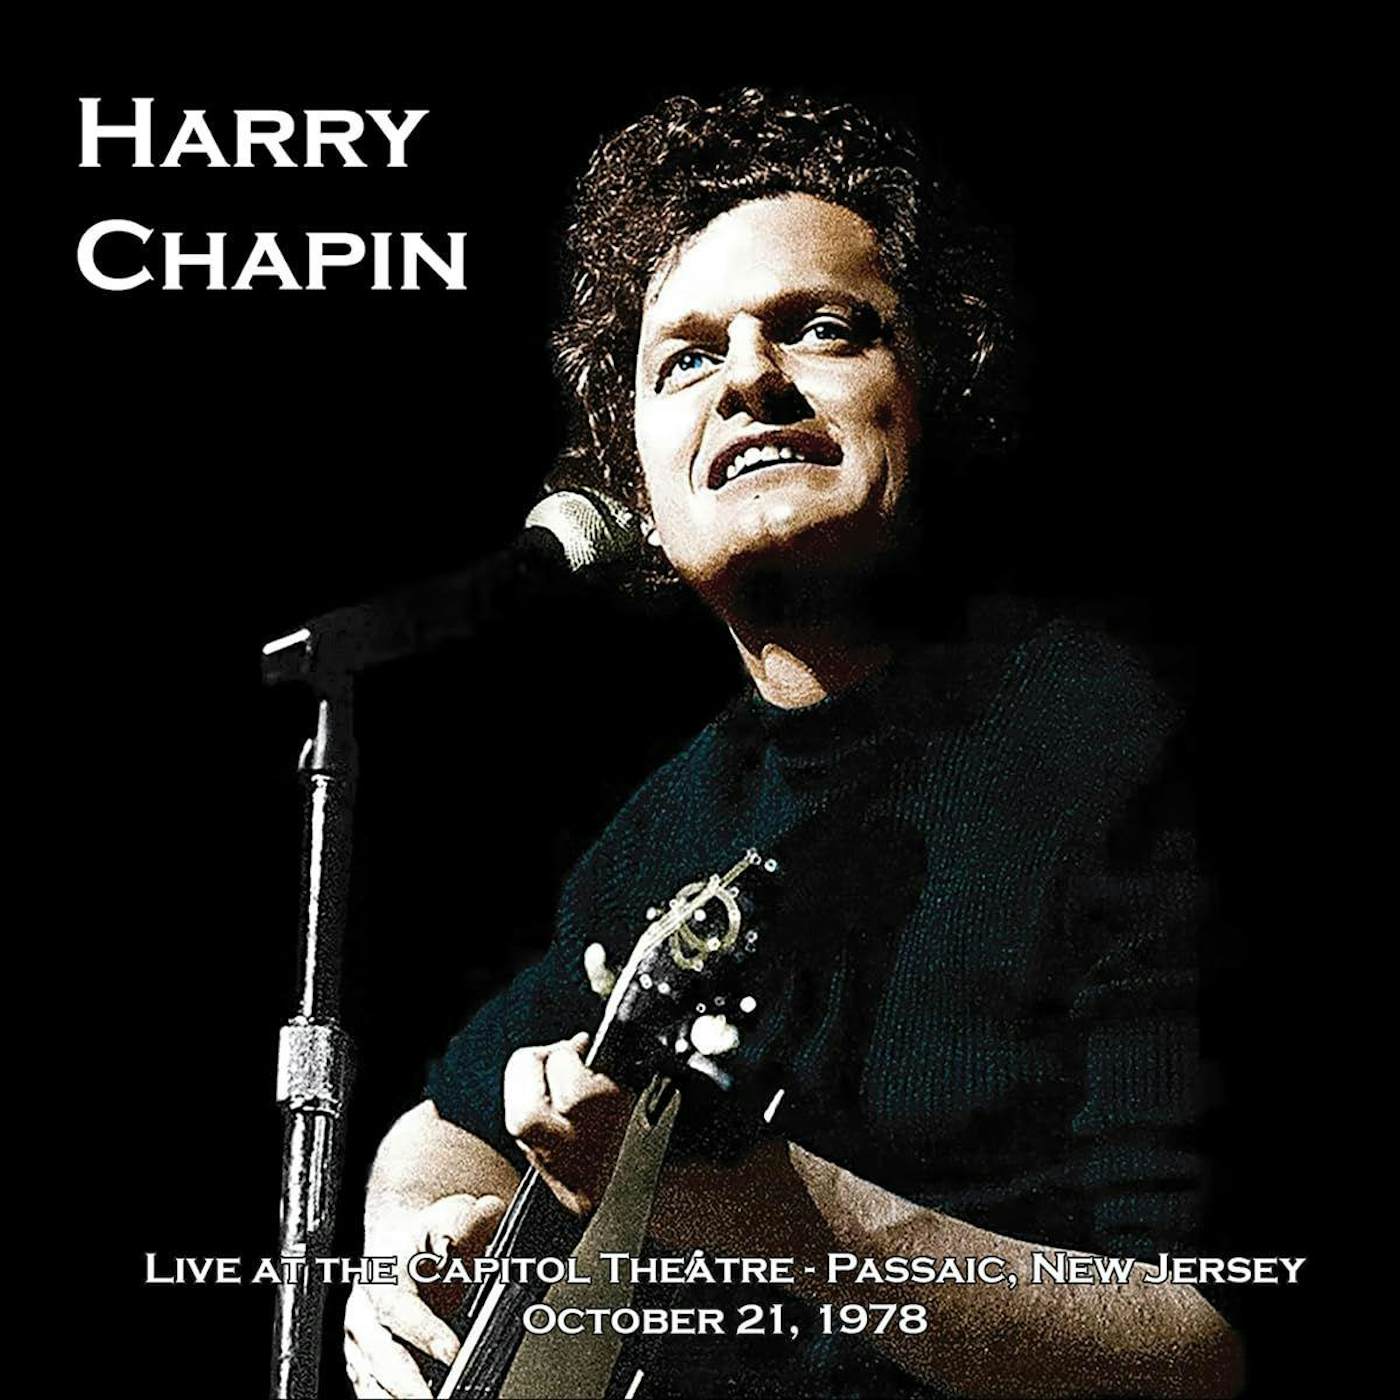 Harry Chapin Live at the Capitol Theatre- October 21, 1978 (Natural Clear/3LP) Vinyl Record